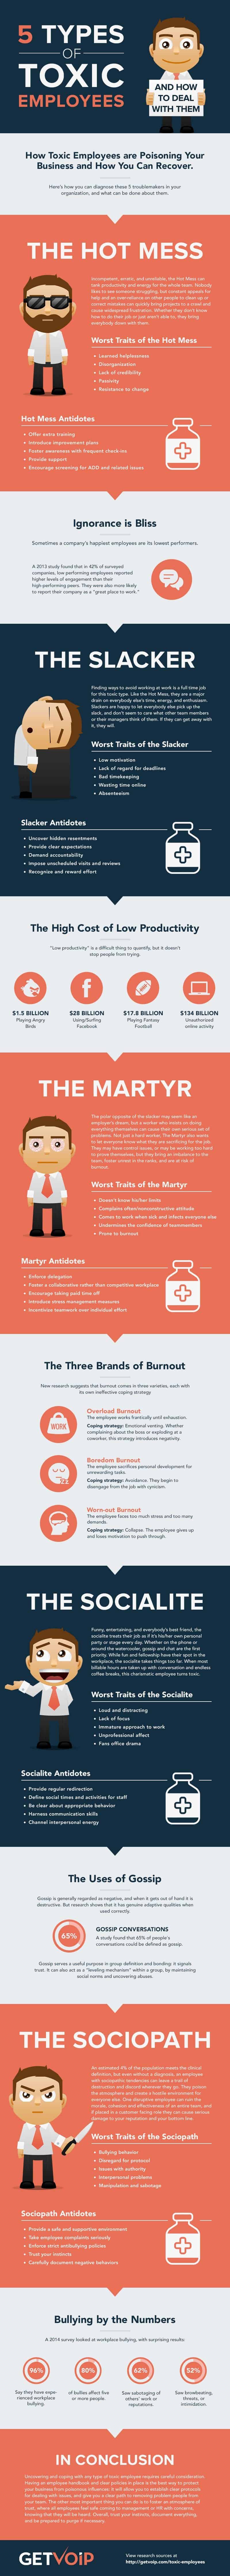 5 types of toxic employees